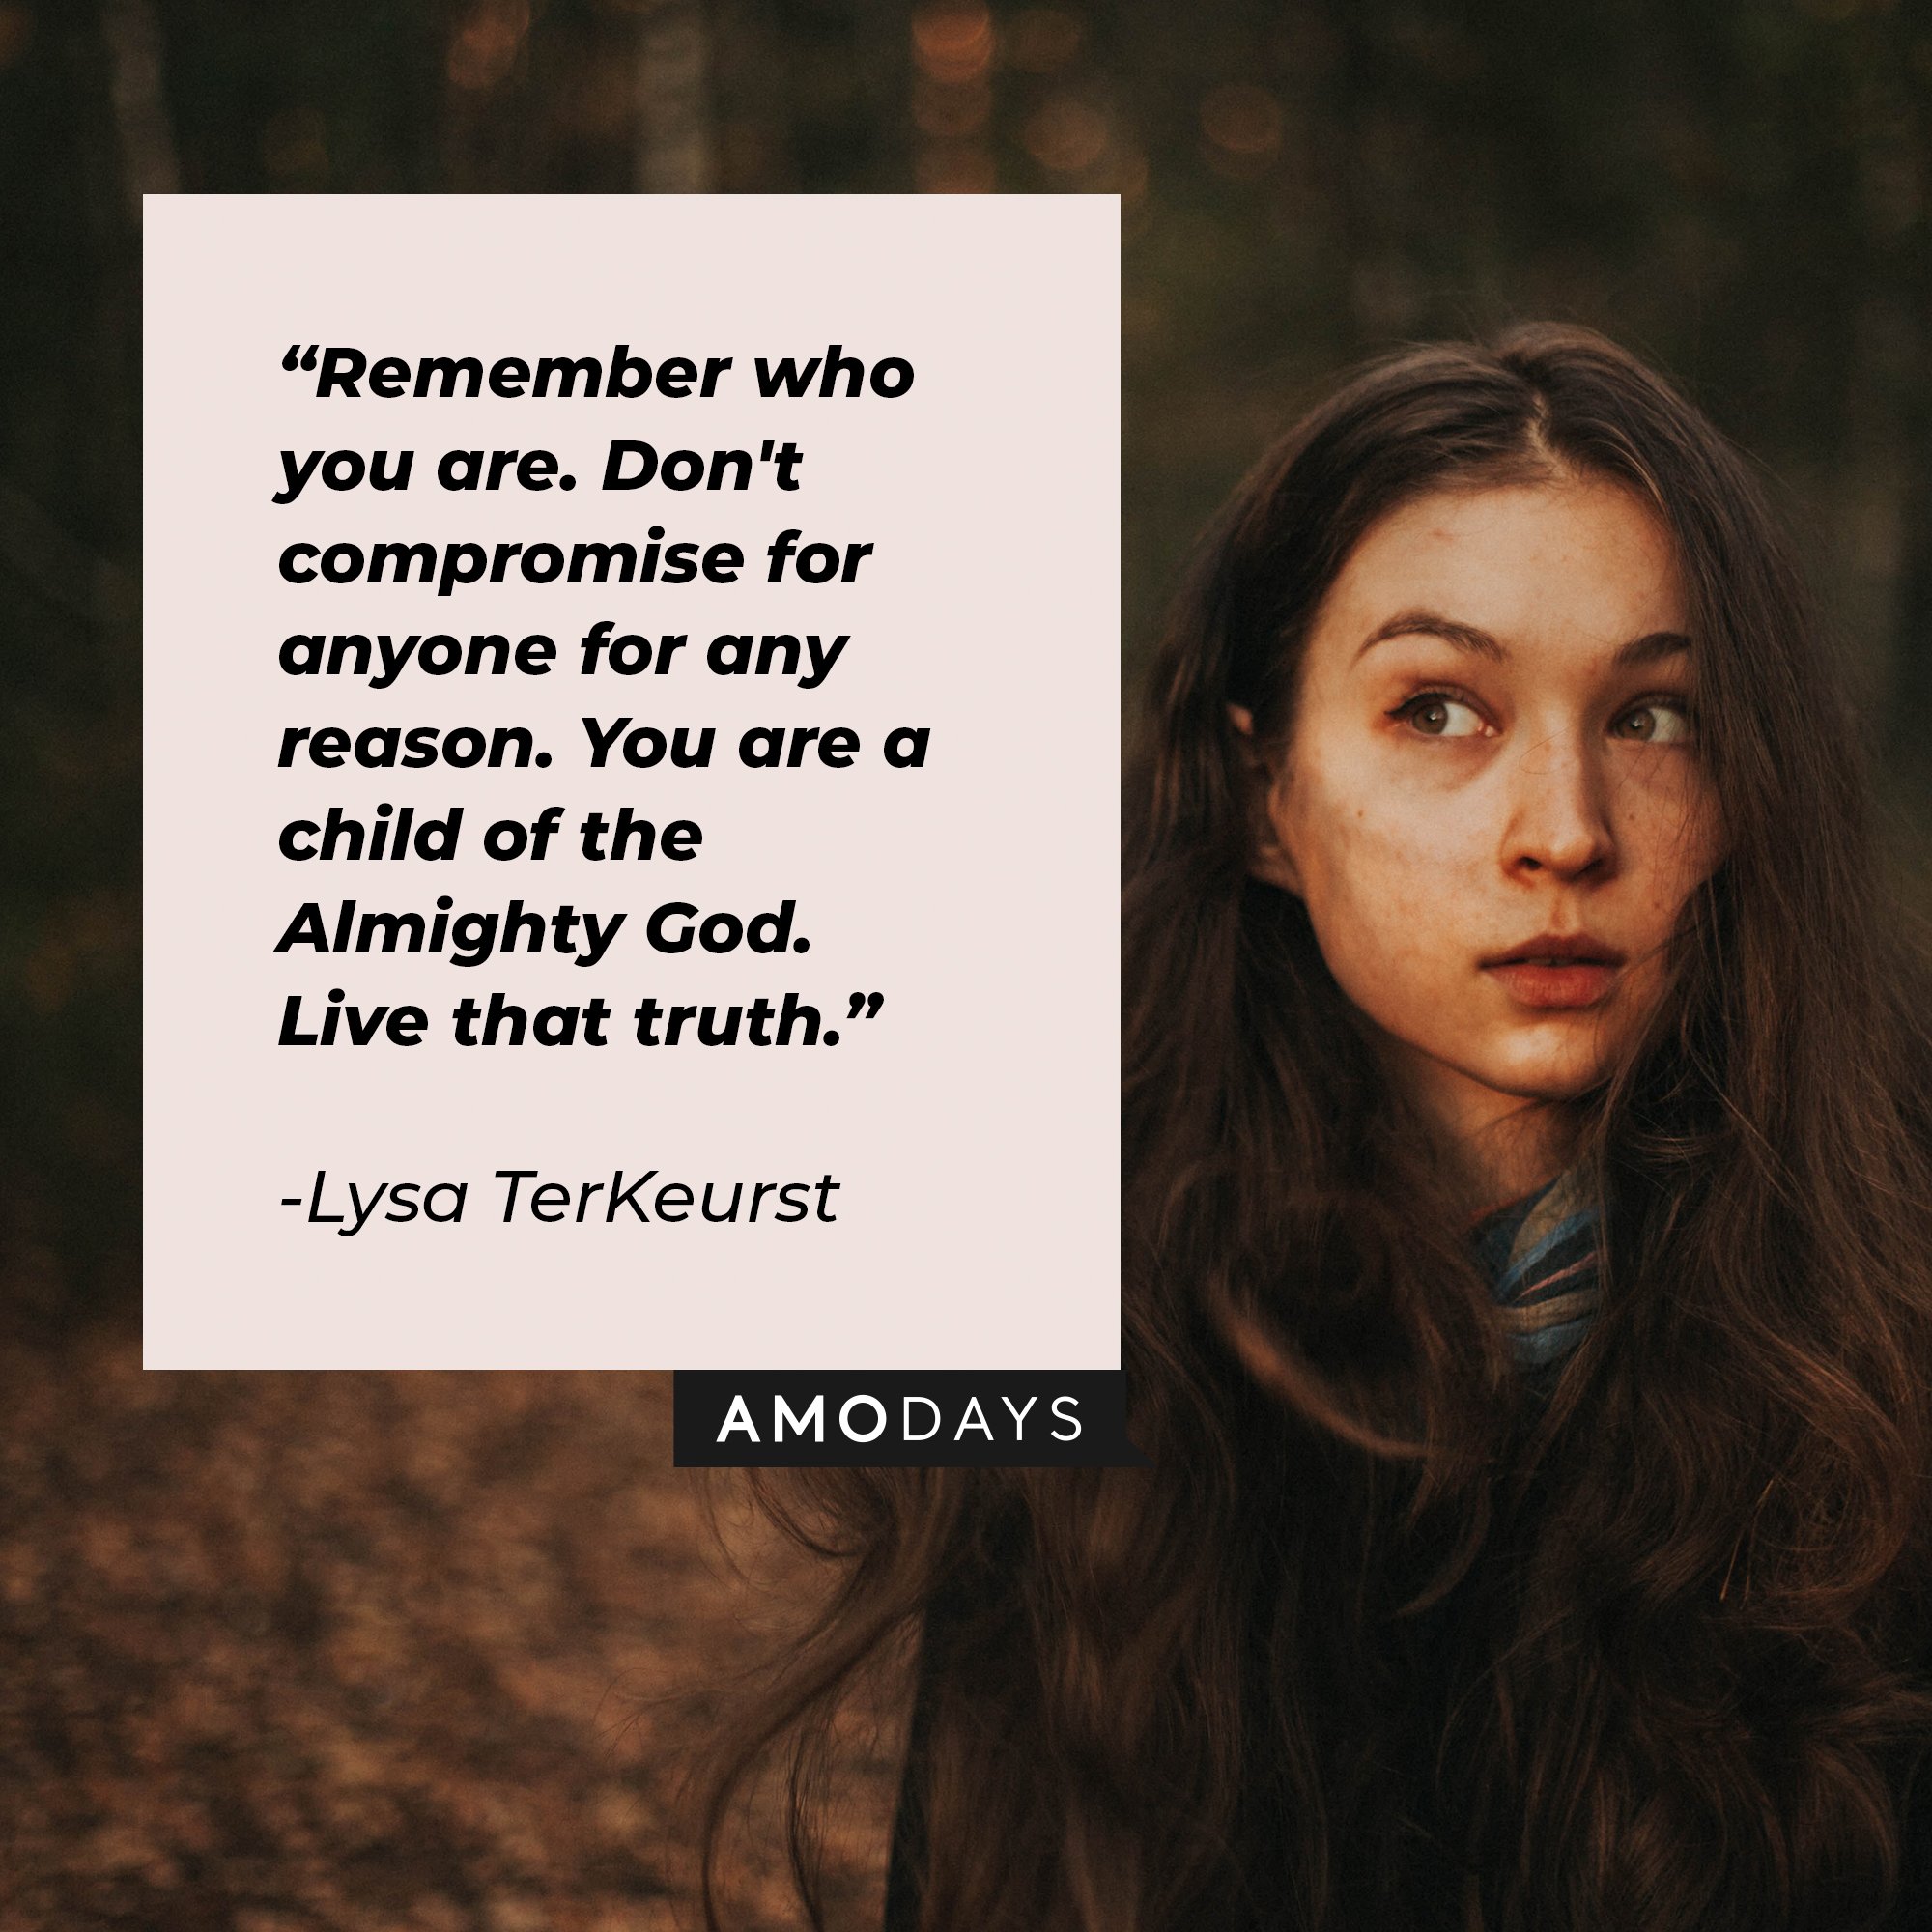 Lysa TerKeurst’s quote: "Remember who you are. Don't compromise for anyone for any reason. You are a child of the Almighty God. Live that truth.” | Image: AmoDays